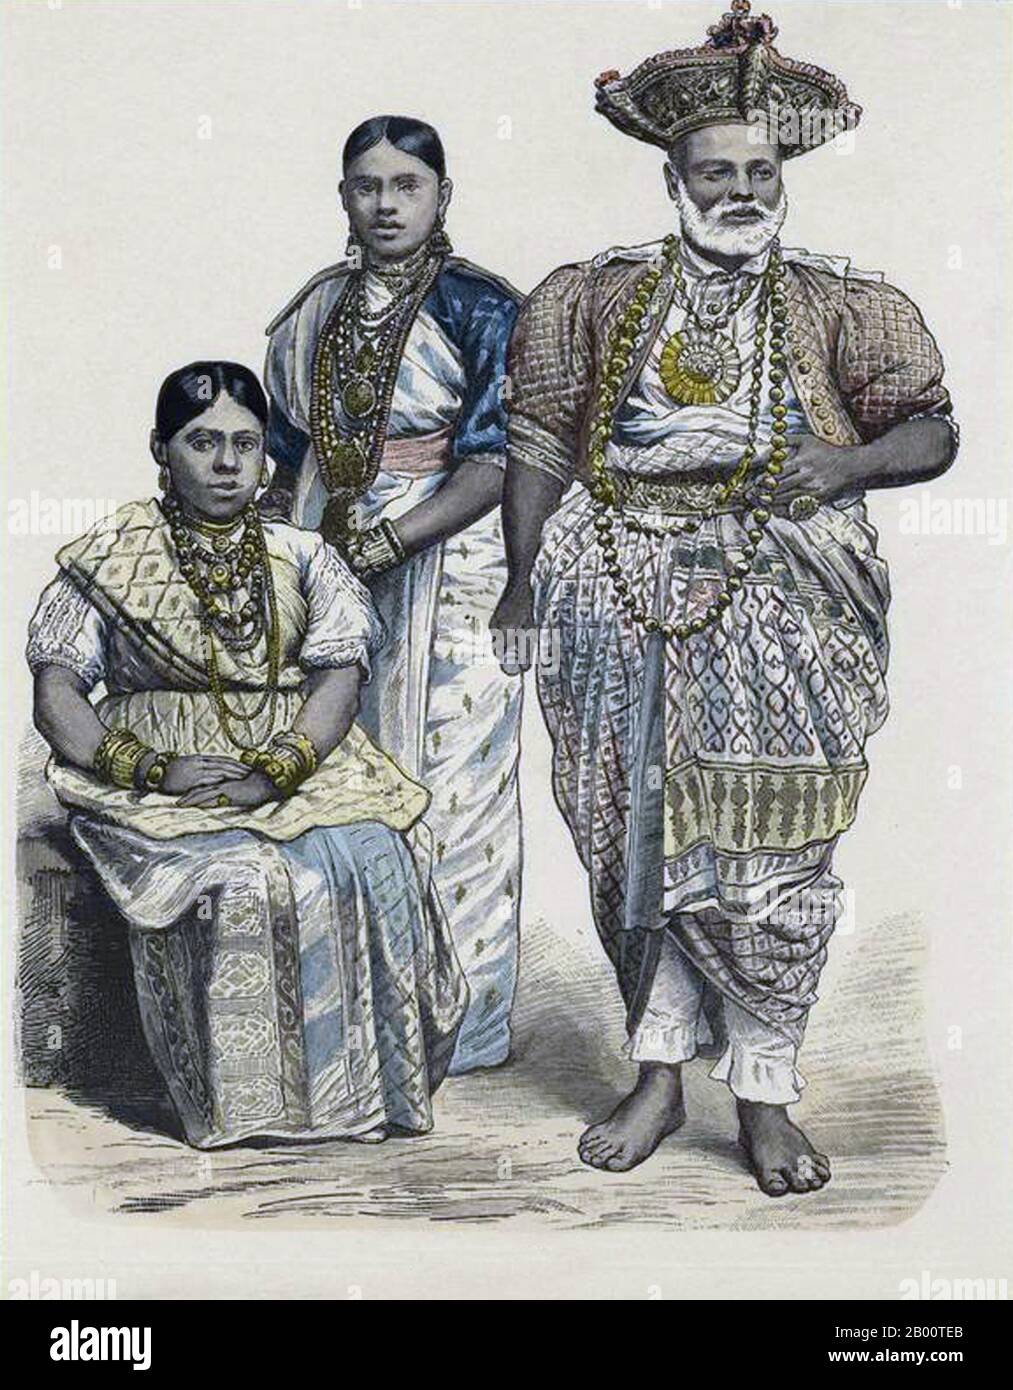 Sri Lanka: Wood engraving of Sinhalese chiefs or Radala, Kandy, 1880.  In 1592 Kandy became the capital city of the last remaining independent kingdom in Sri Lanka after the coastal regions had been conquered by the Portuguese. Kandy stayed independent until the early 19th century. In the Second Kandyan War, the British met no resistance and reached the city on February 10, 1815. On March 2, 1815, a treaty known as the Kandyan Convention was signed between the British and the Radalas (Kandyan aristocrats); Kandy recognized the King of England as its King and became a British protectorate. Stock Photo